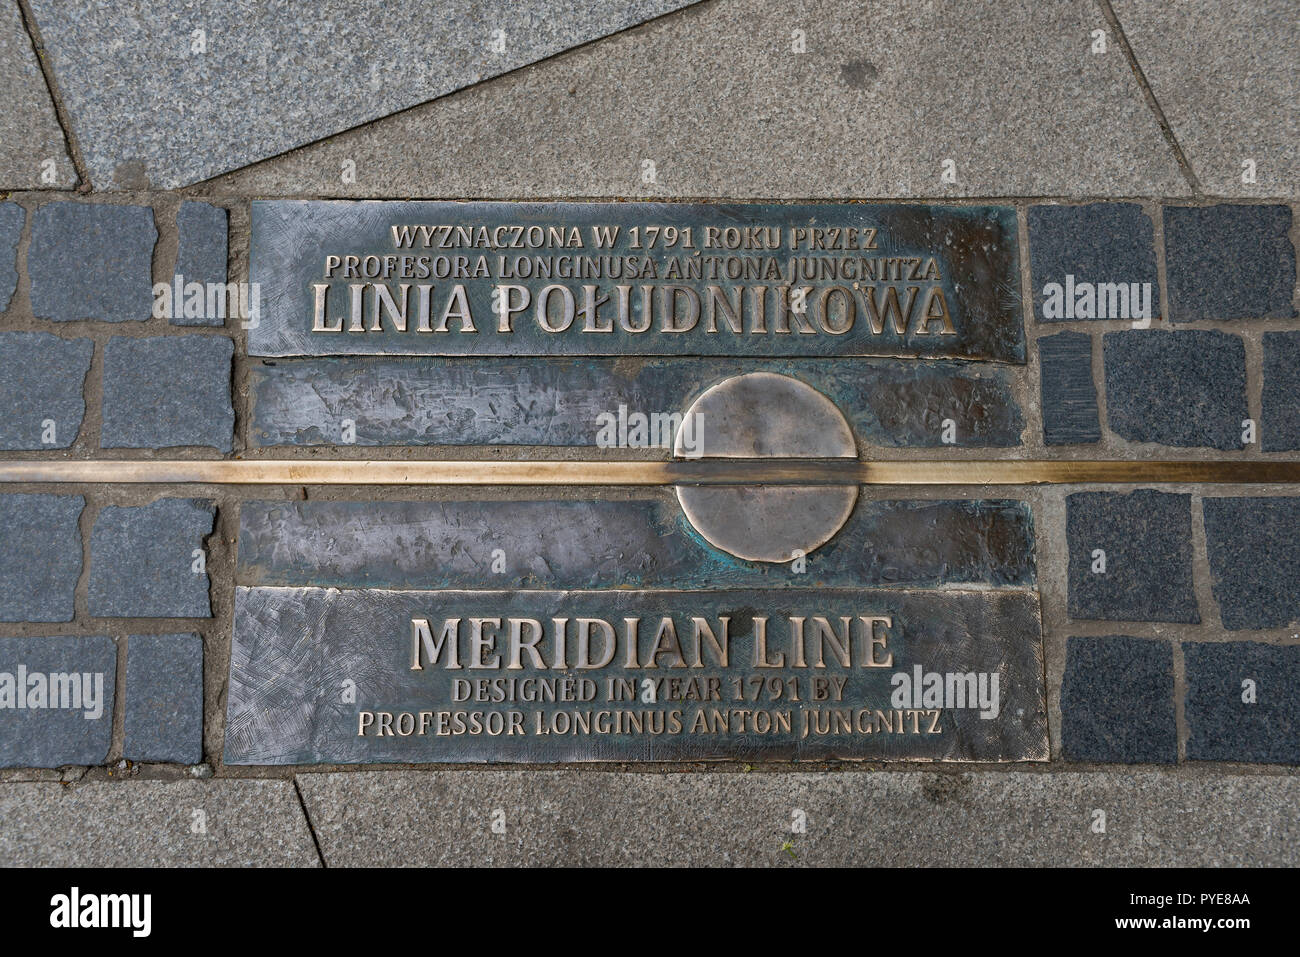 View of a pavement block notifying passersby of the 17th Meridian which passes through the city of Wroclaw in Poland. Stock Photo